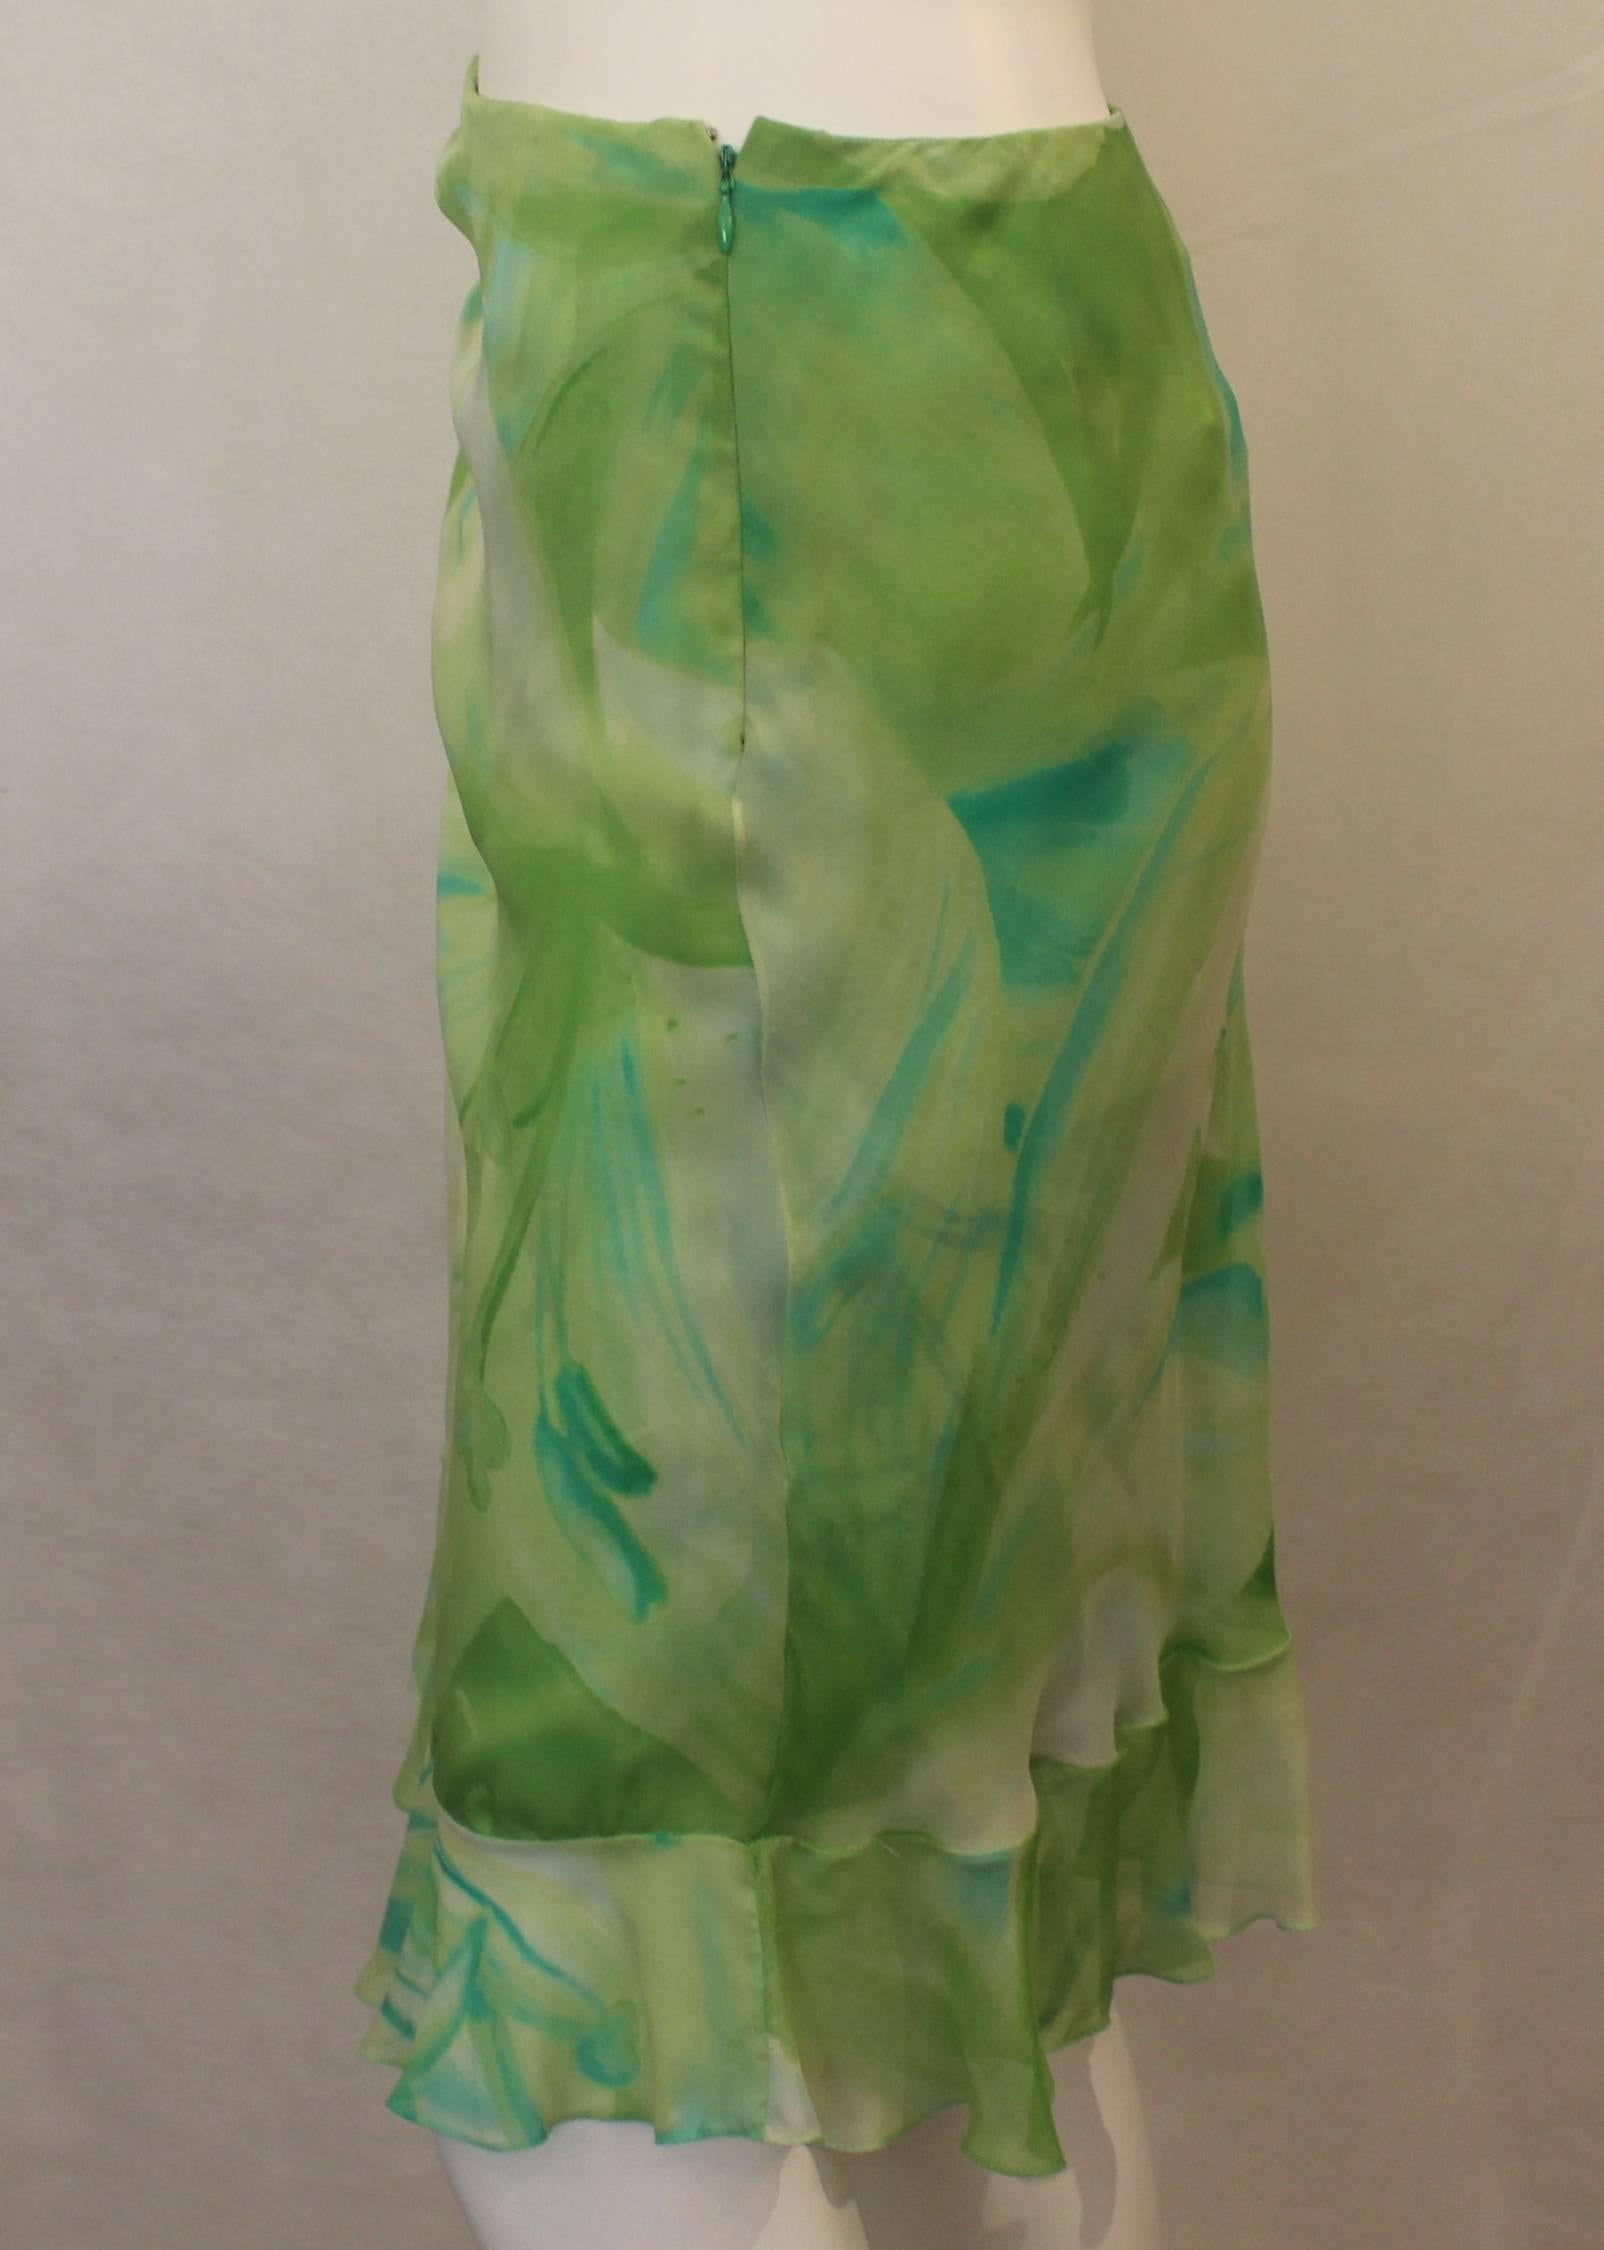 Oscar de la Renta Green Watercolor-Like Floral Printed Silk Chiffon Skirt  In Excellent Condition For Sale In West Palm Beach, FL